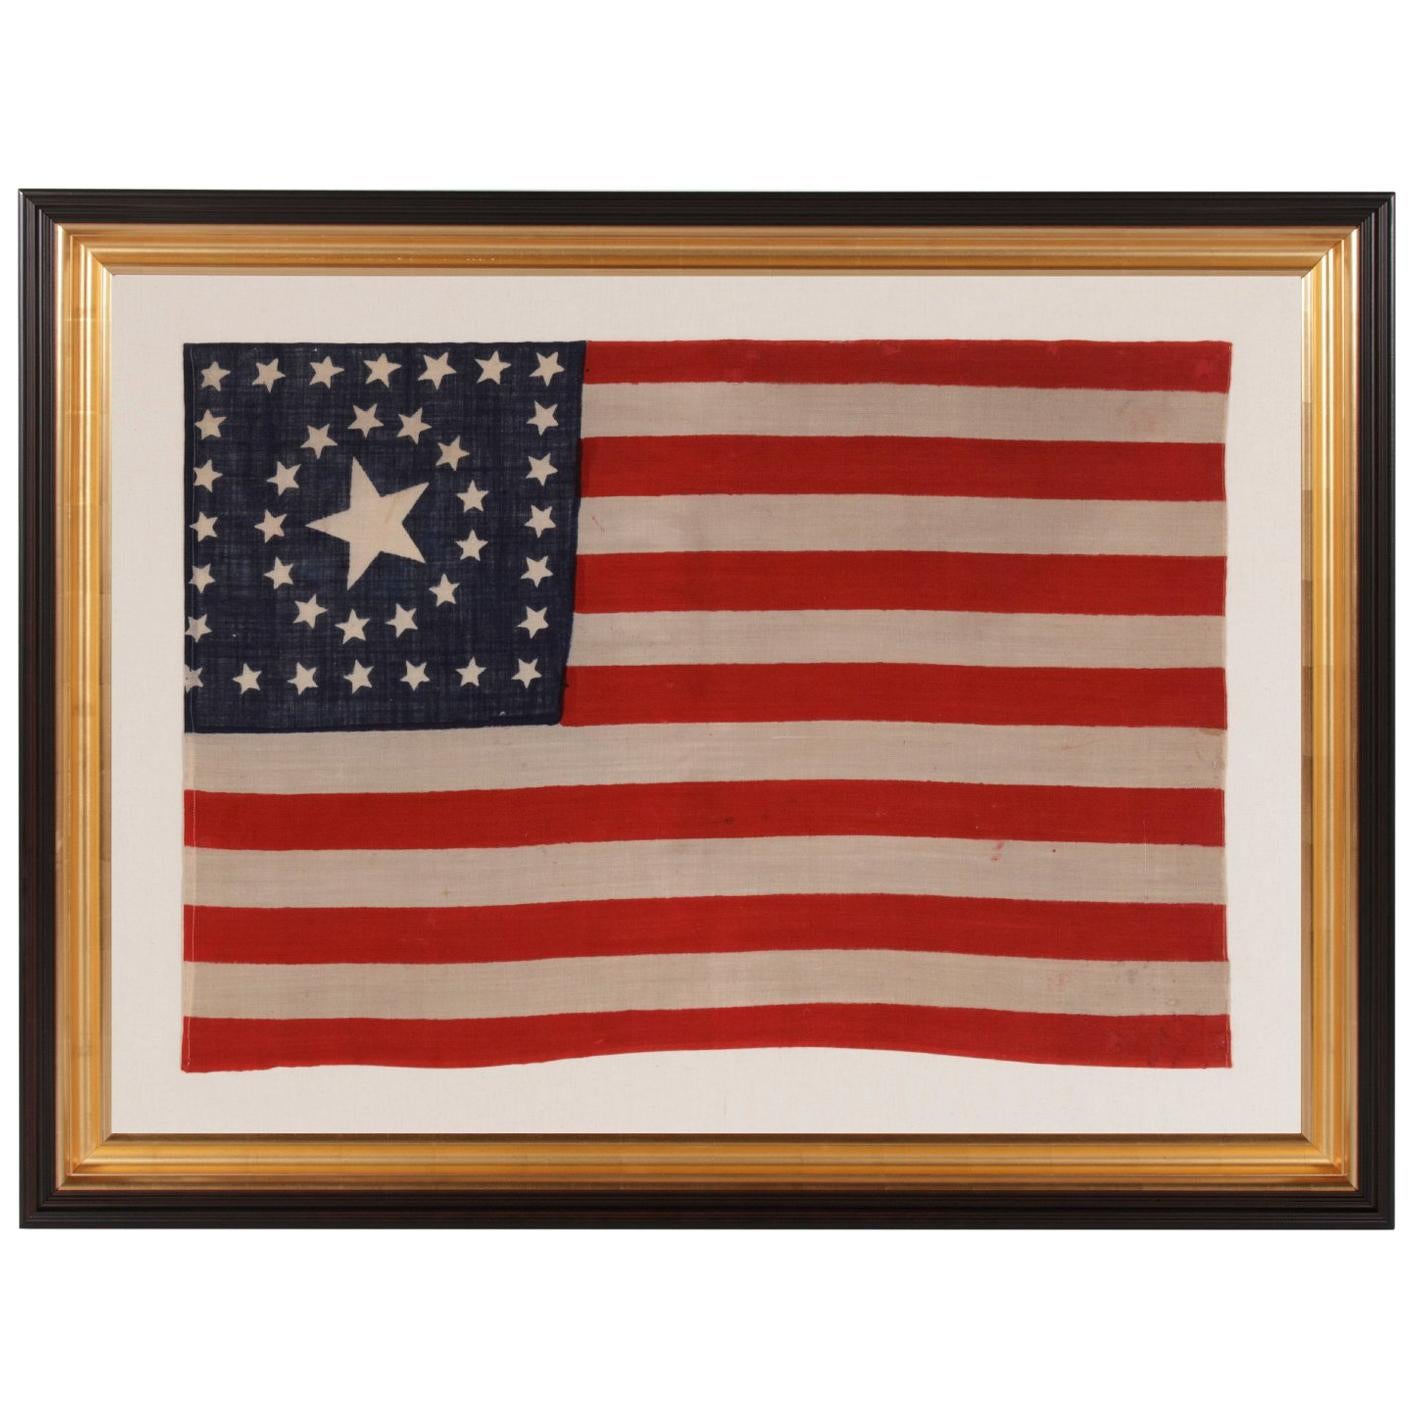 38 Star, Circle-In-A-Square Medallion American Flag, Made by Horstmann Brothers